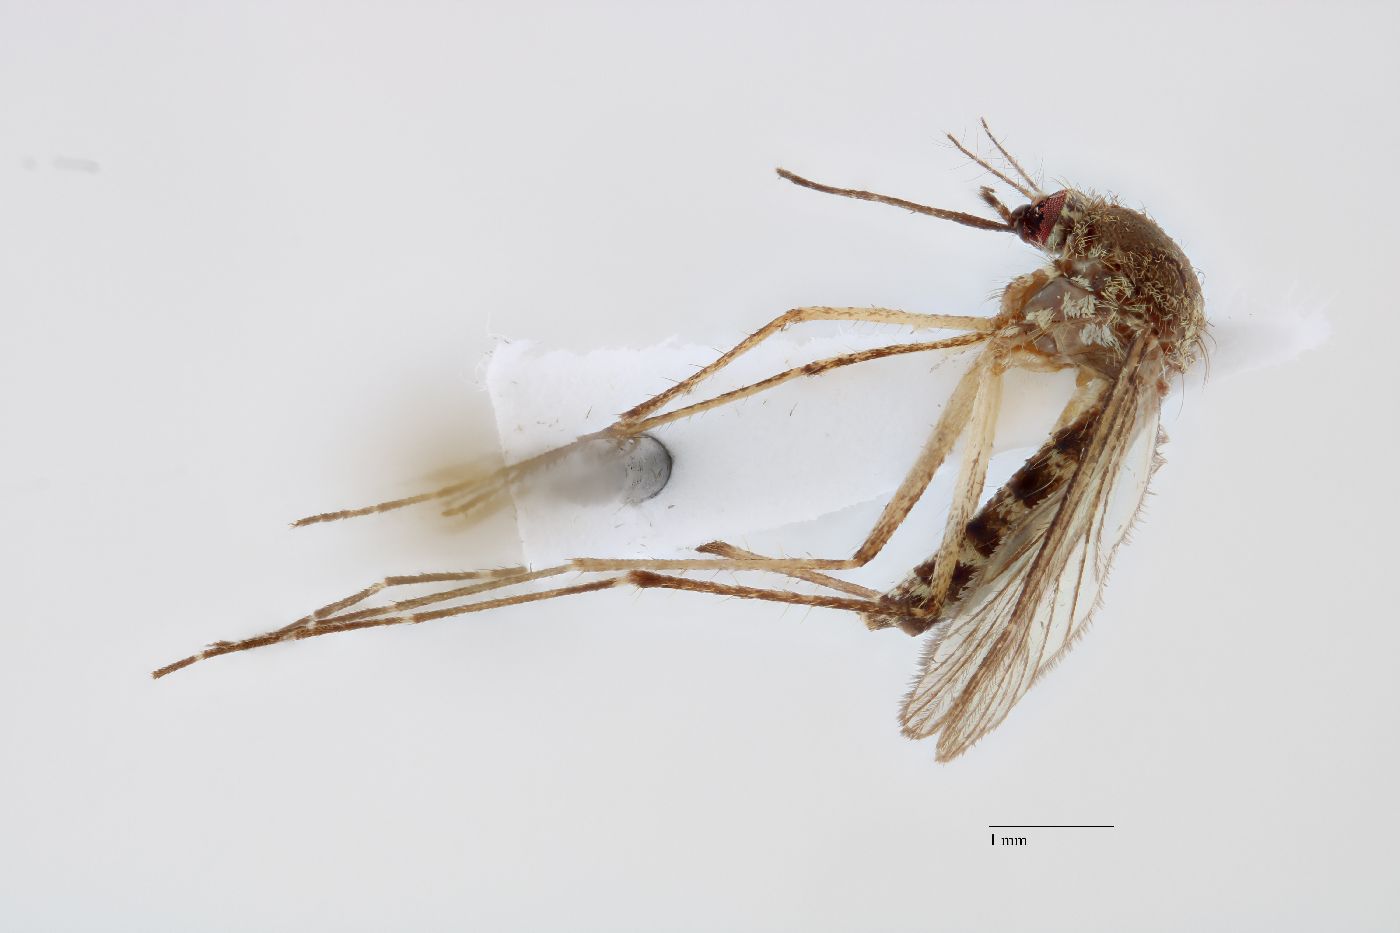 Aedes vexans image